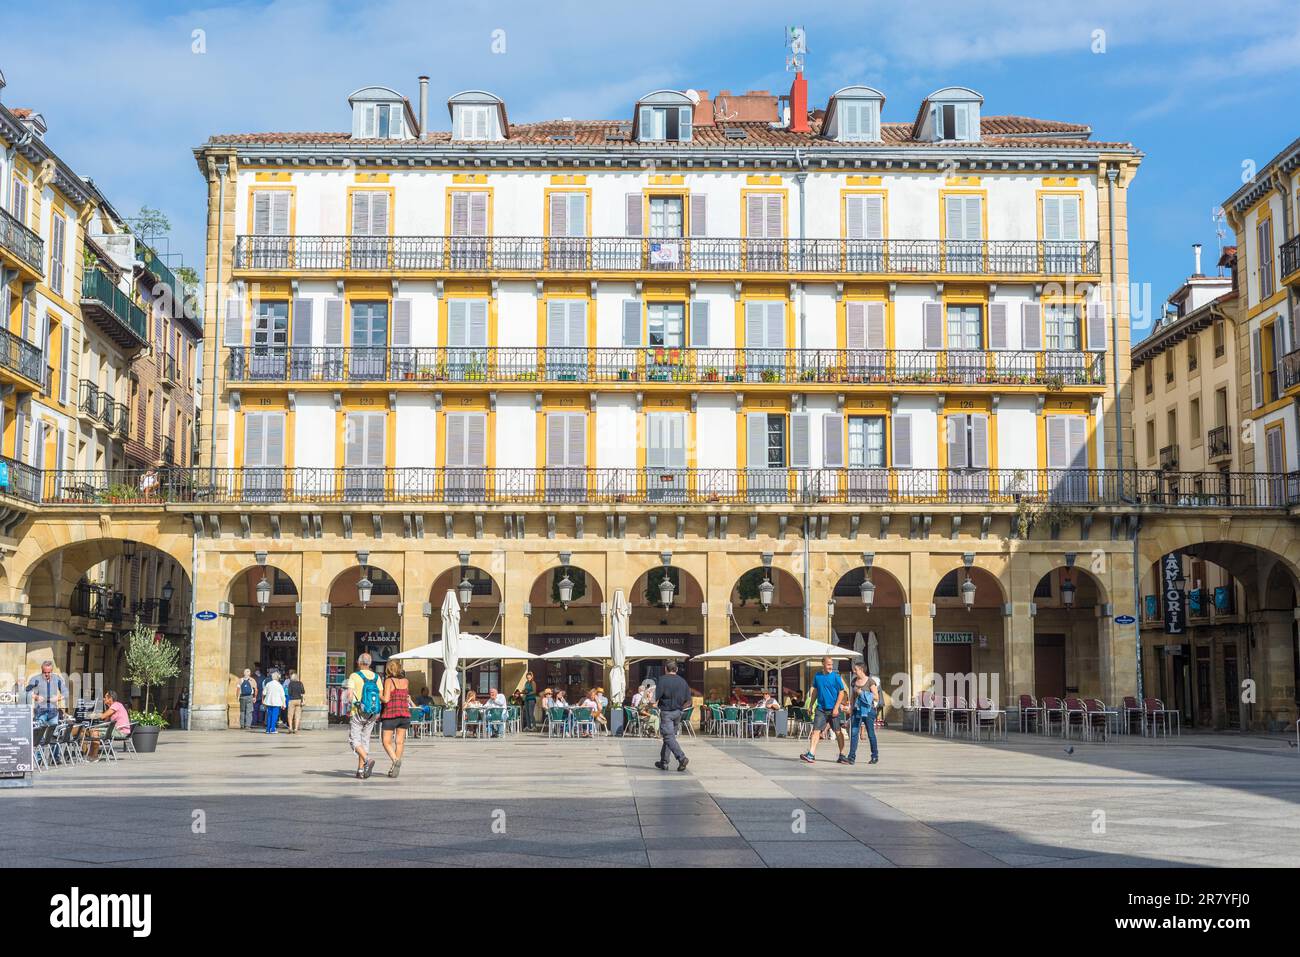 Historical buildings around the Constitution square in Donostia, The square, Spanish, Plaza de la Constitution is also a former bullfight ring Stock Photo